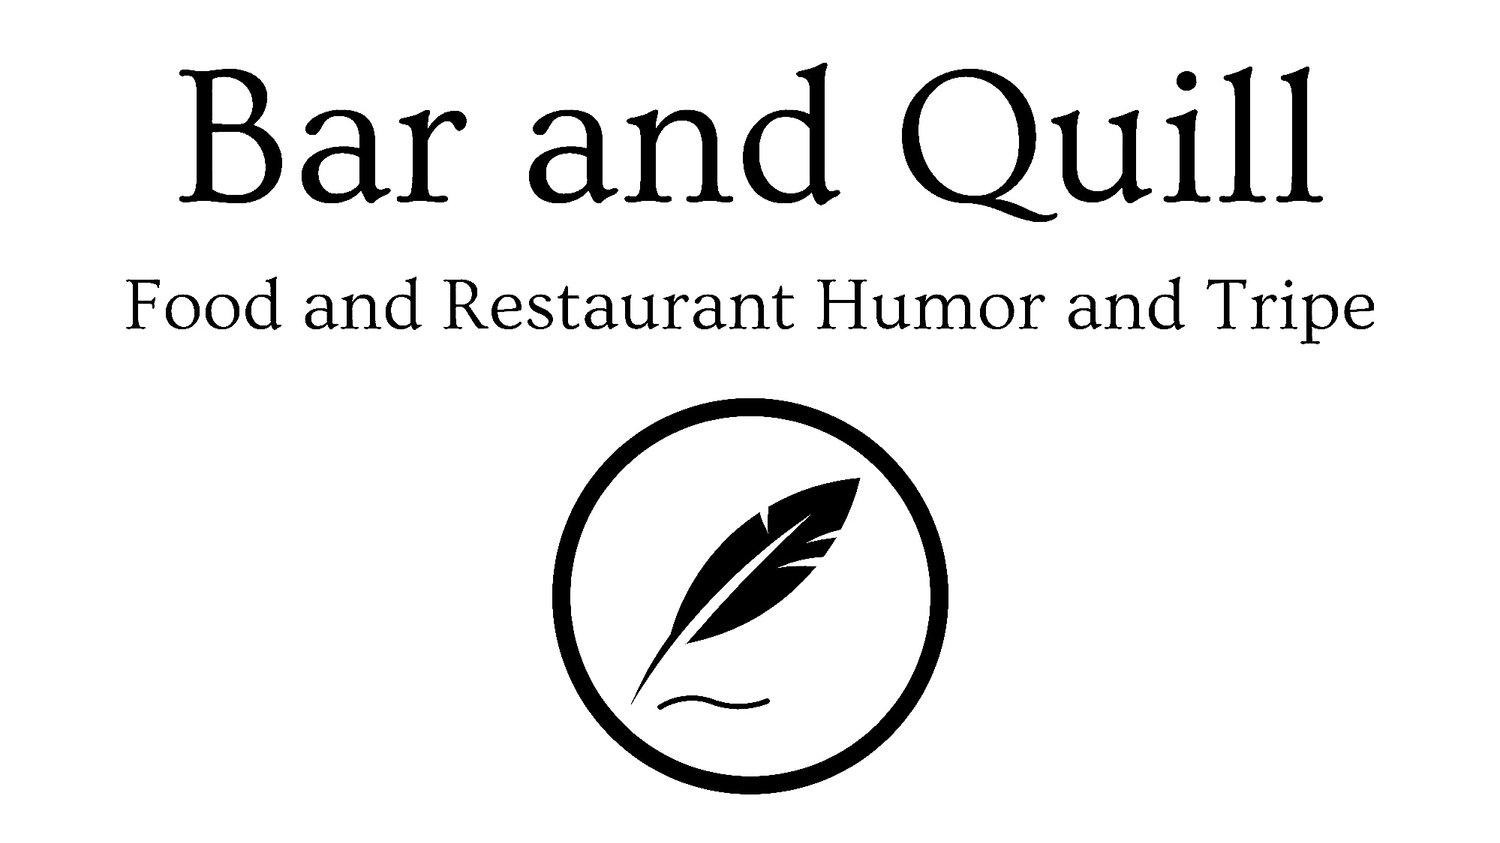 Bar and Quill: Food and Restaurant Humor